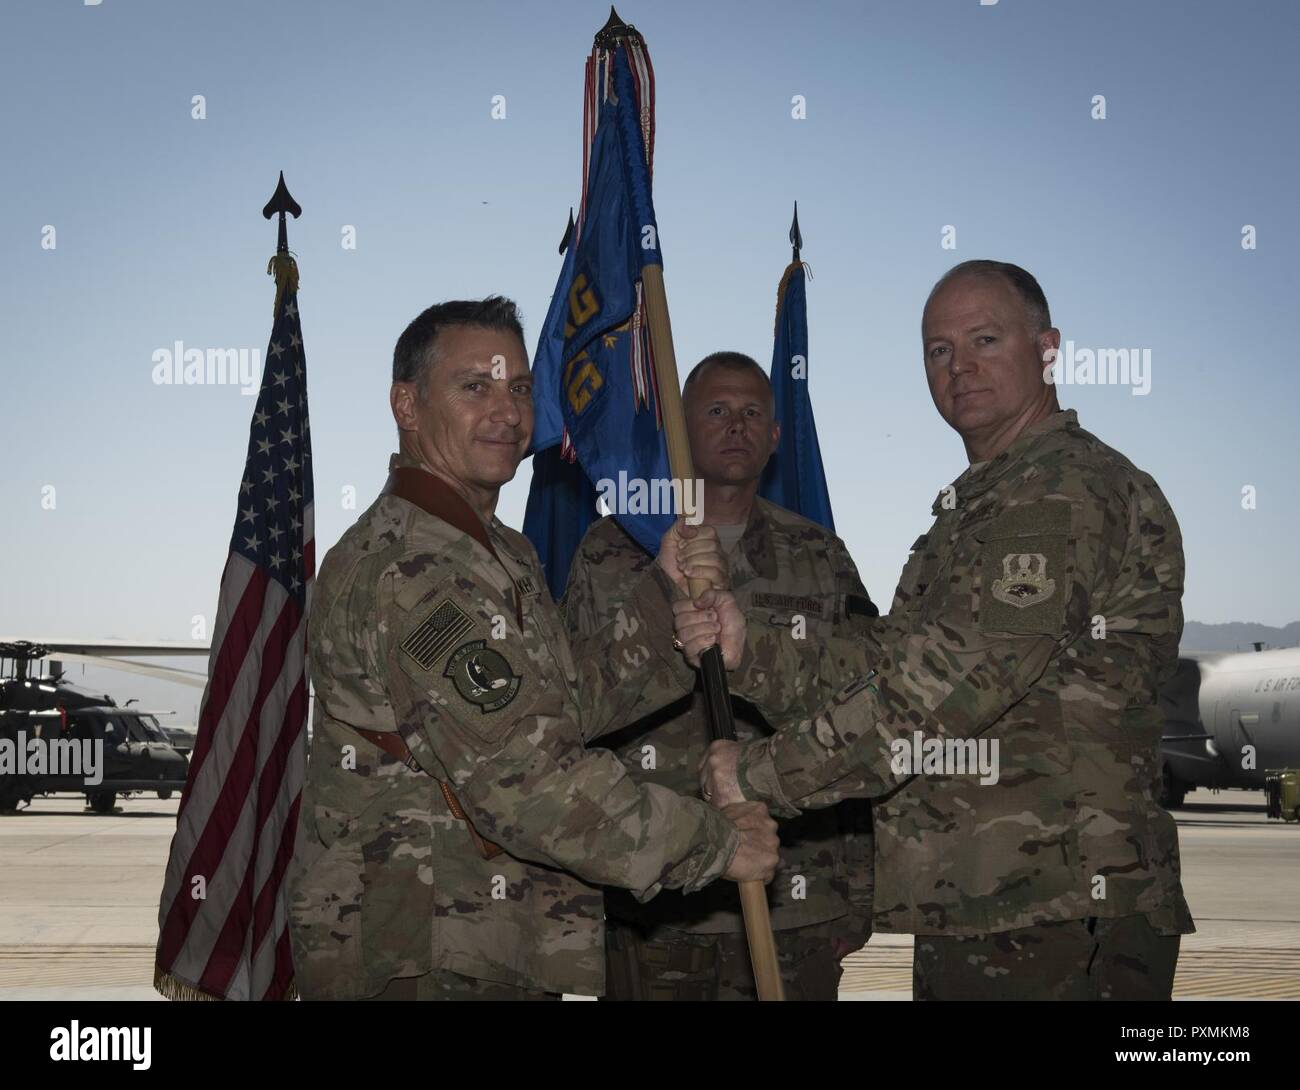 Col. Tim Trimmell, the incoming 455th Expeditionary Maintenance Group commander, receives the 455th EMXG guidon from Brig. Gen. Craig Baker, the 455th Air Expeditionary Wing commander, officially granting him command of the 455th EMXG during a change of command ceremony at Bagram Airfield, Afghanistan, June 17, 2017. Trimmell previously served as the United States Air Forces Europe-United Kingdom deputy director. Stock Photo